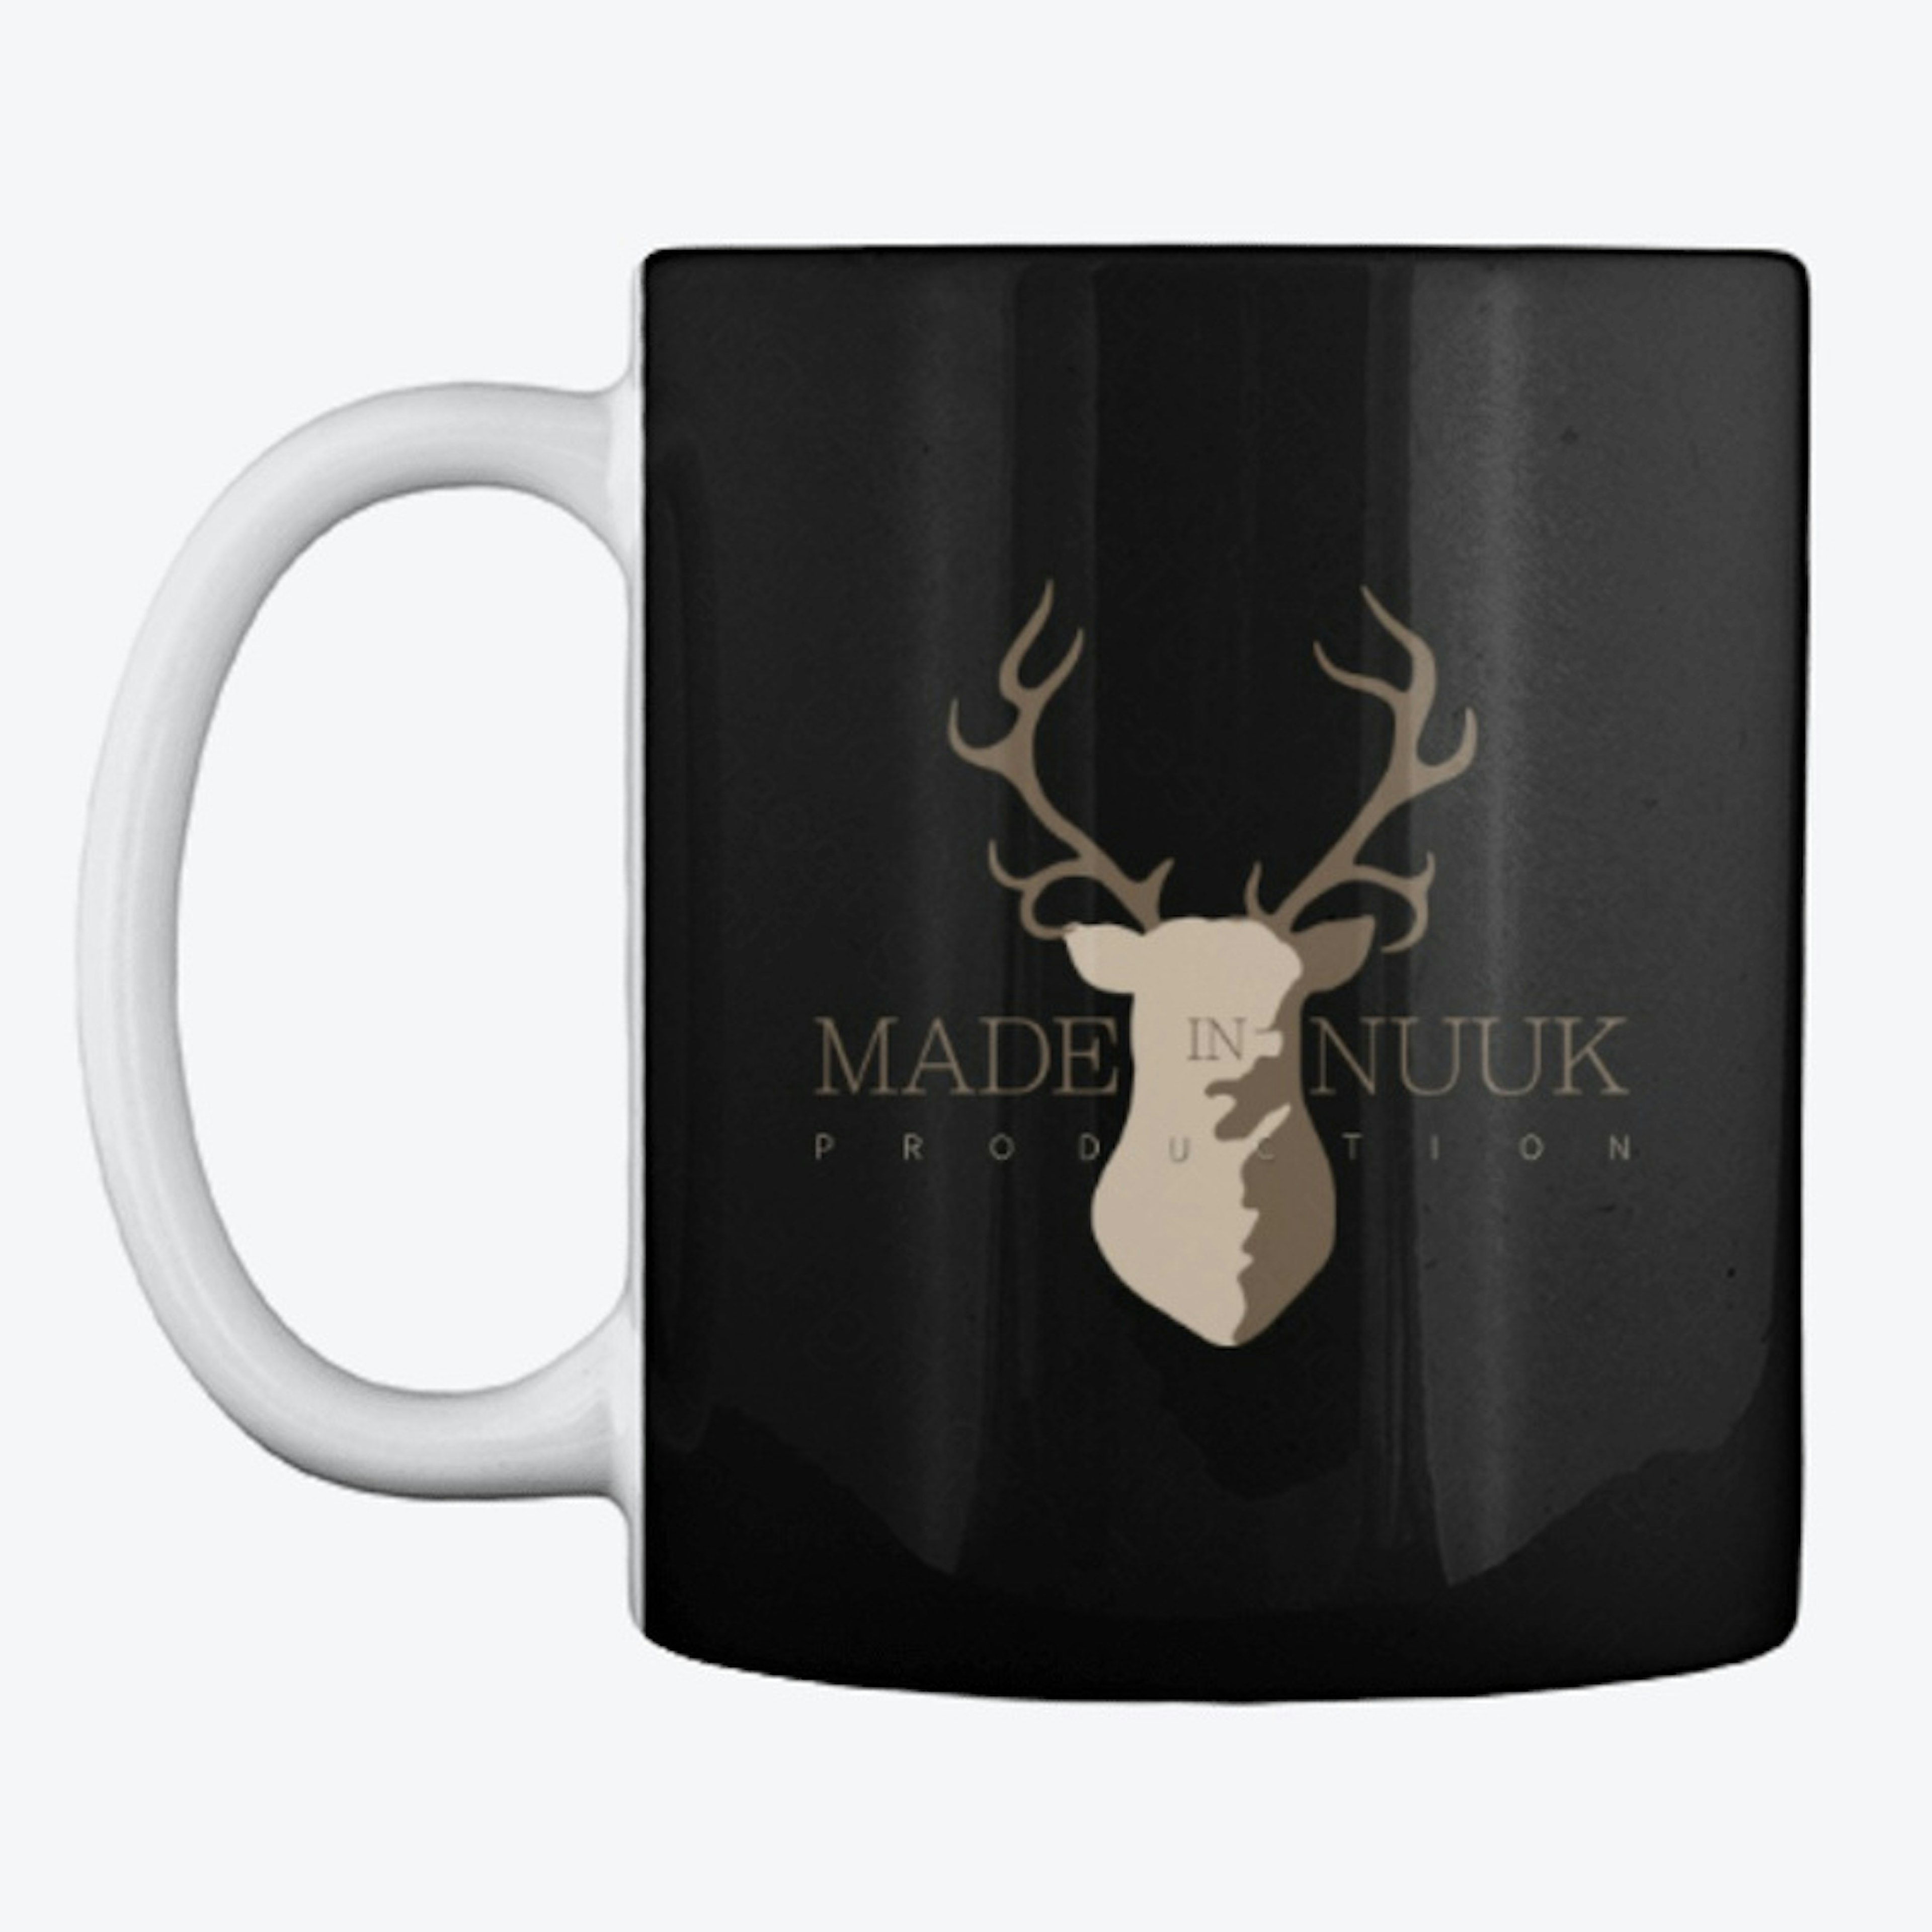 Made in Nuuk production coffee cup